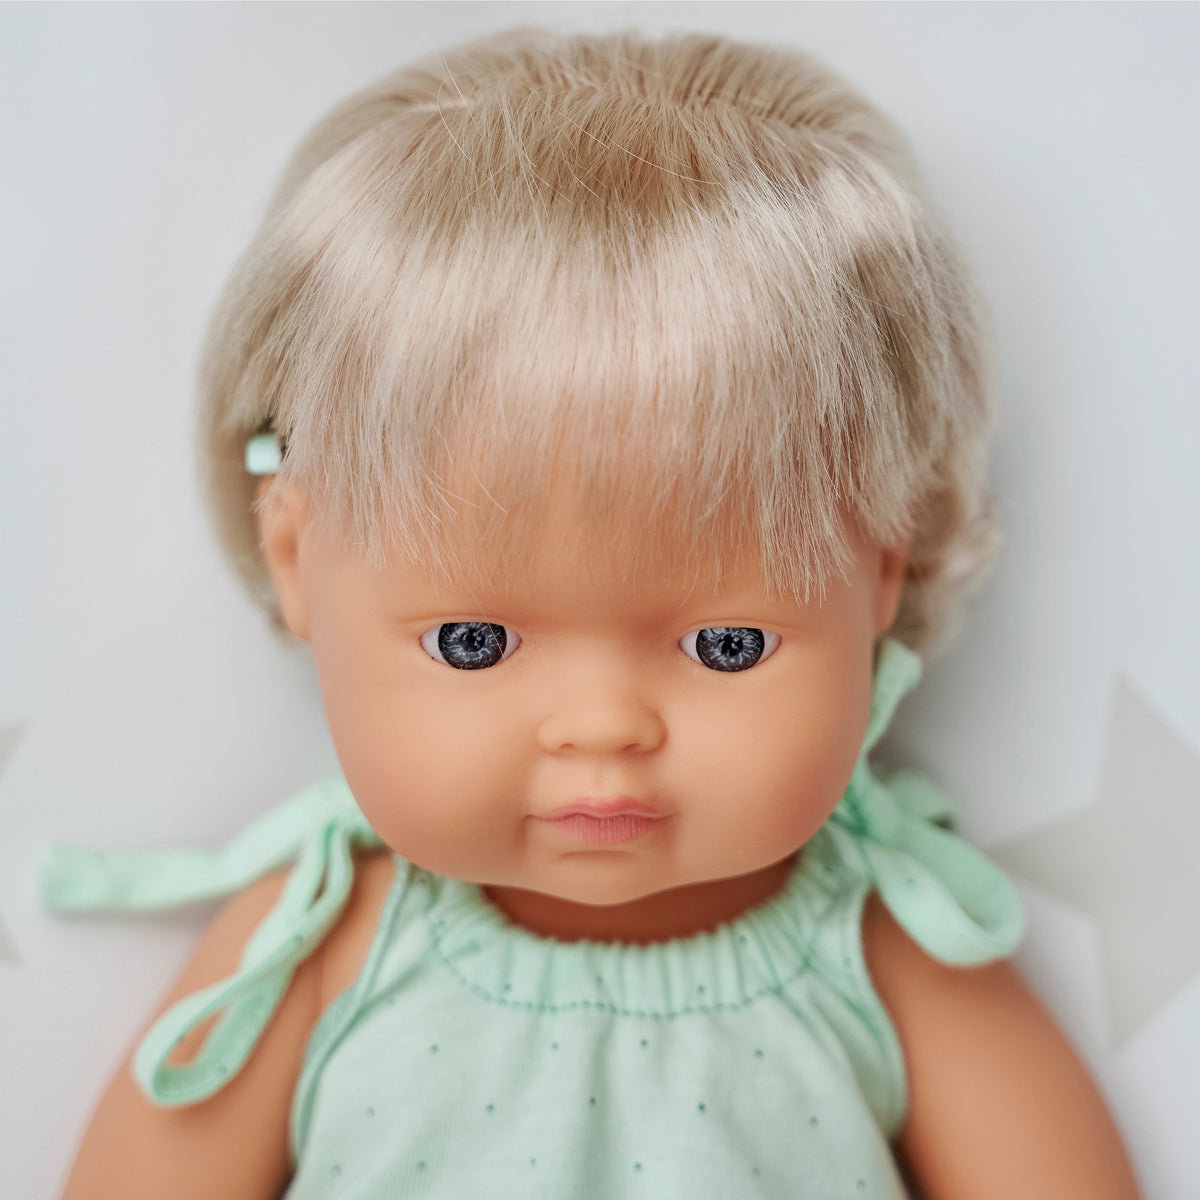 Baby Doll Caucasian Girl with Hearing Aid 15'' in Polybag